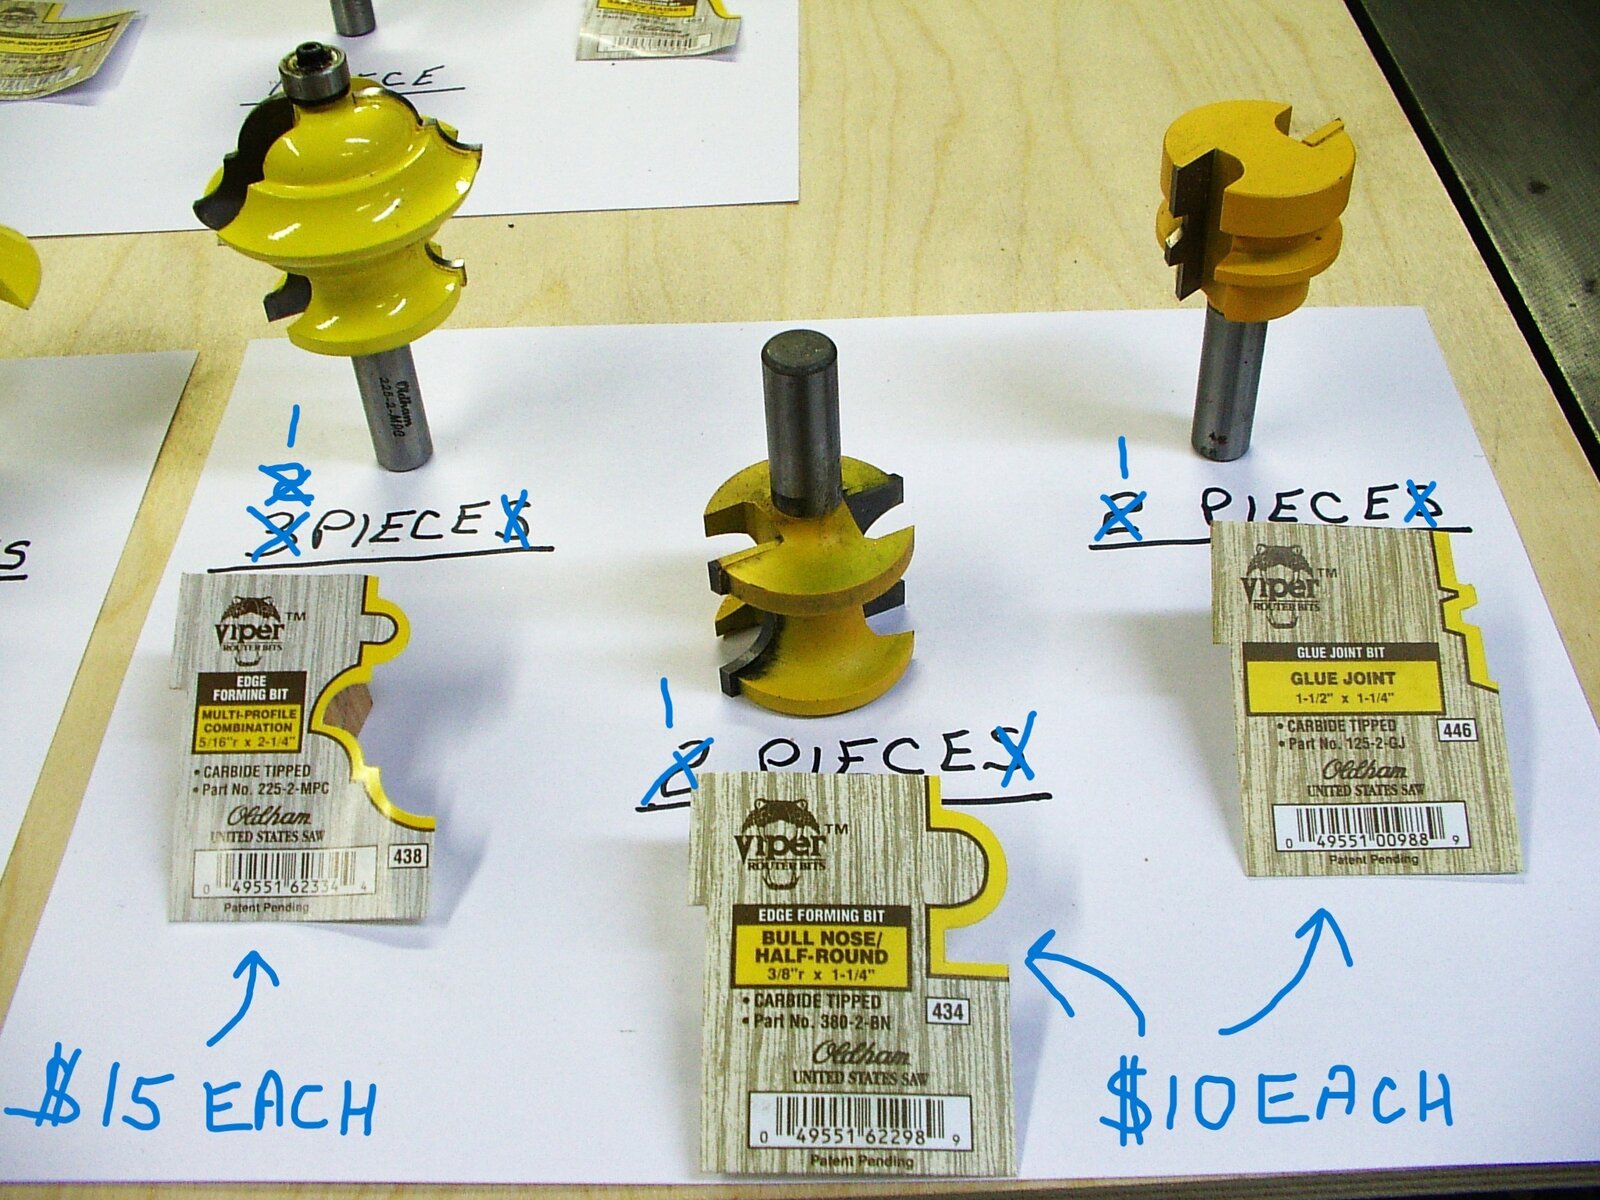 Large router bits #2.JPG with prices.JPG price change.JPG newest prices.JPG